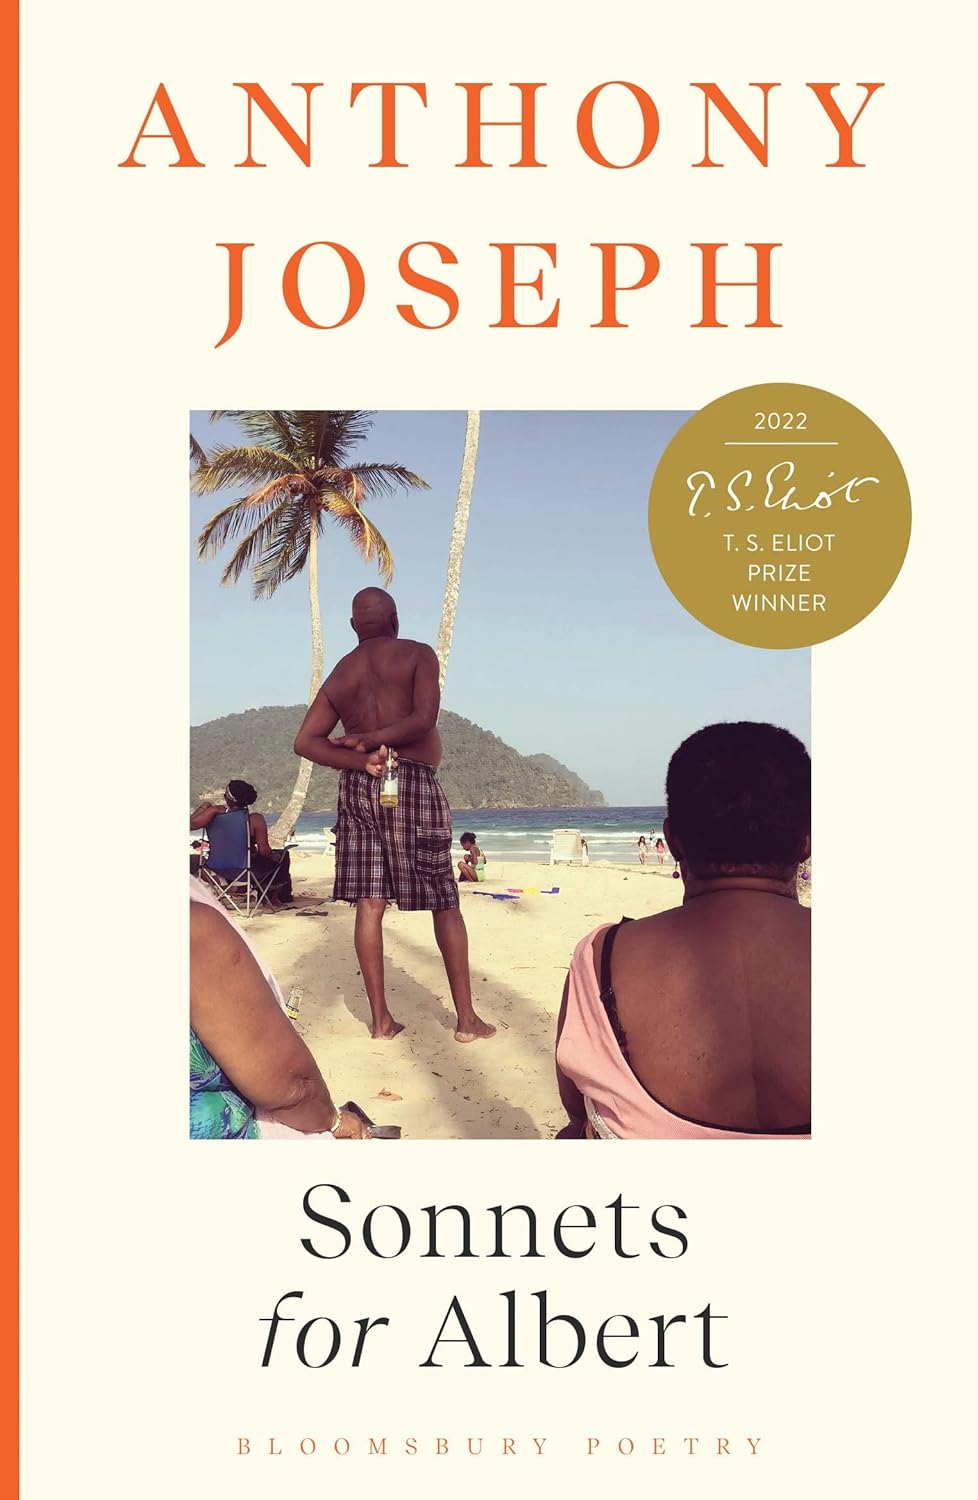 The cover of Anthony Joseph's book 'Sonnets for Albert'